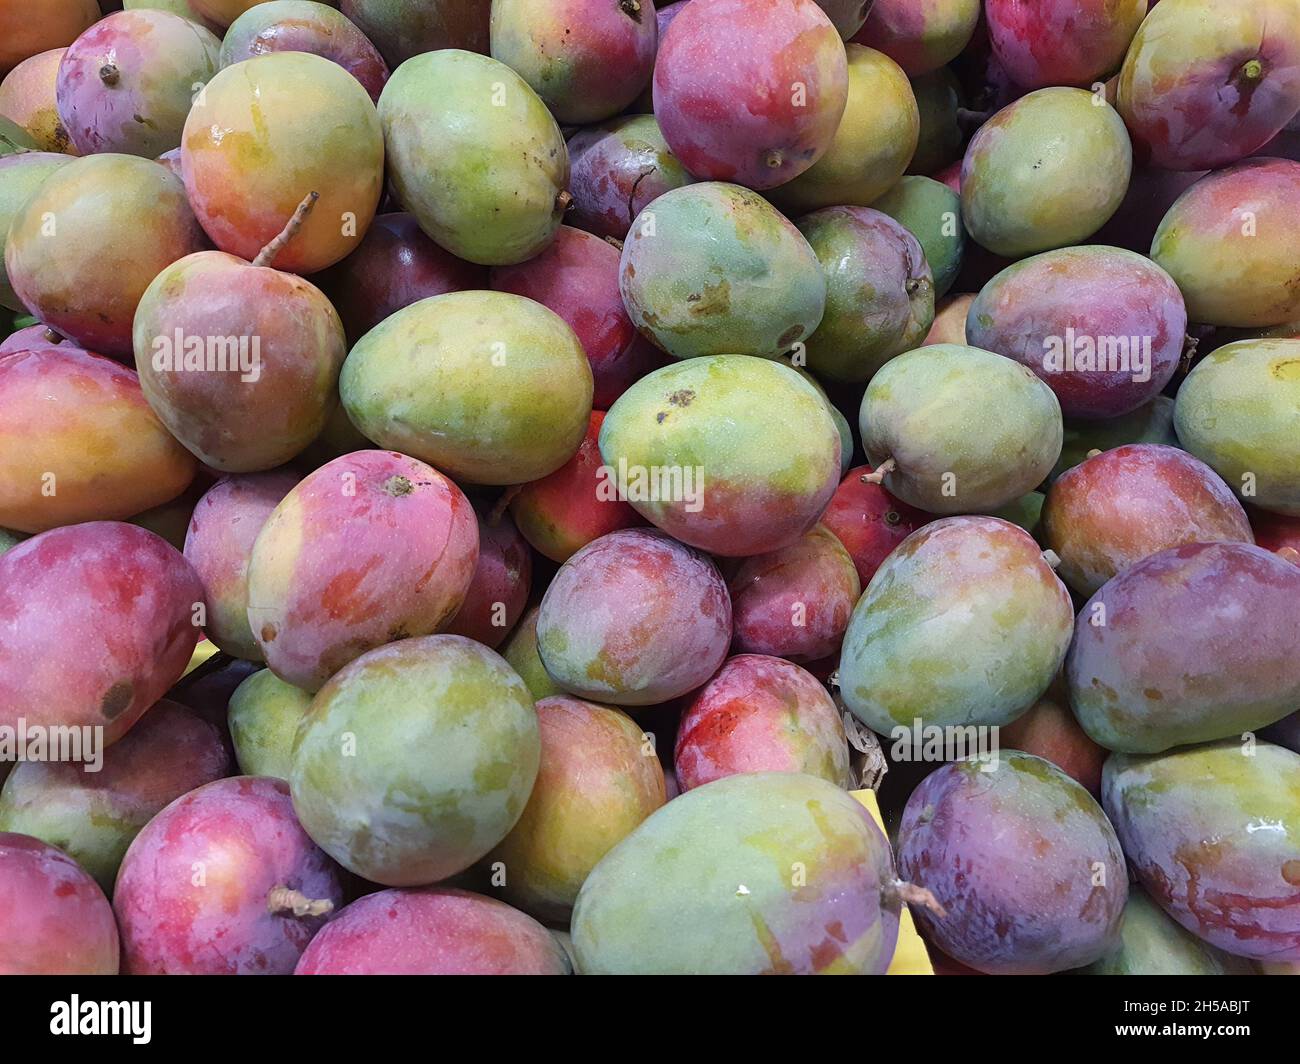 Mango Tommy Atkins, in a market, full screen. Stock Photo